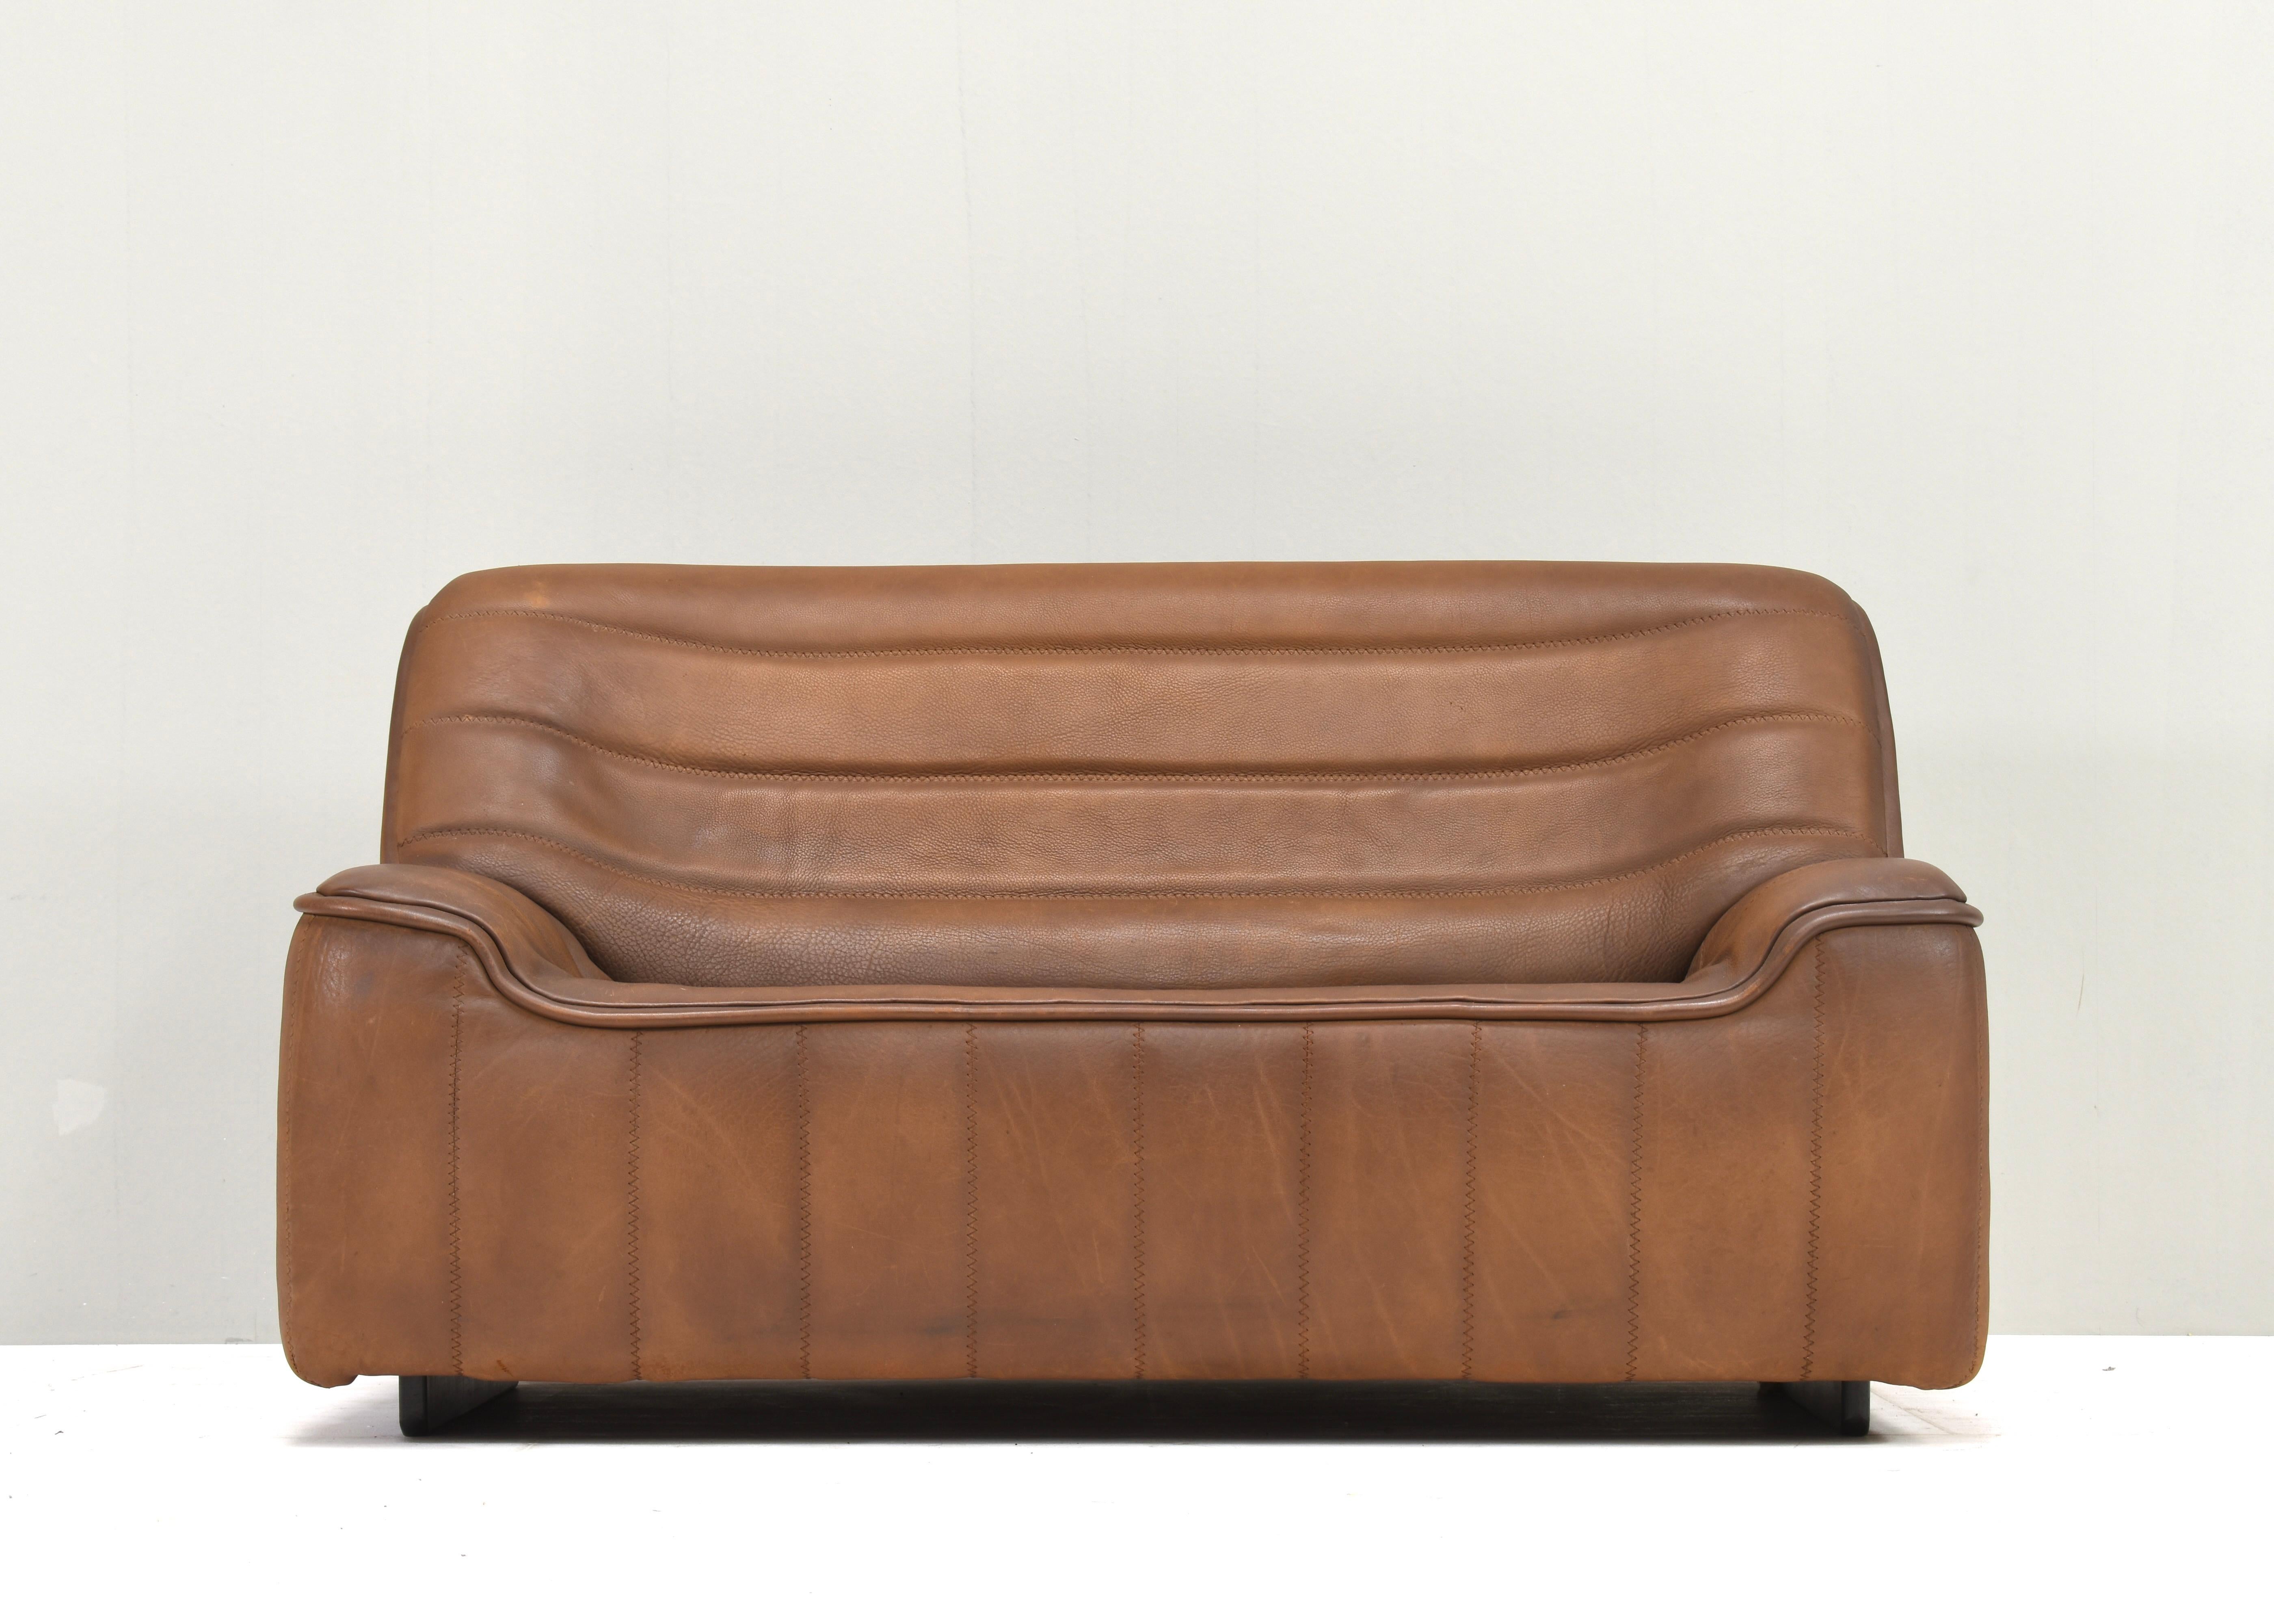 Introducing the De Sede DS84 Sofa in Buffalo leather - Switzerland, 1970's - Where Luxury Meets Comfort
Also available with 3 seat sofa and coffee table.

Designer: De Sede design team
Manufacturer: De Sede
Model: DS-84 sofa
Design period: